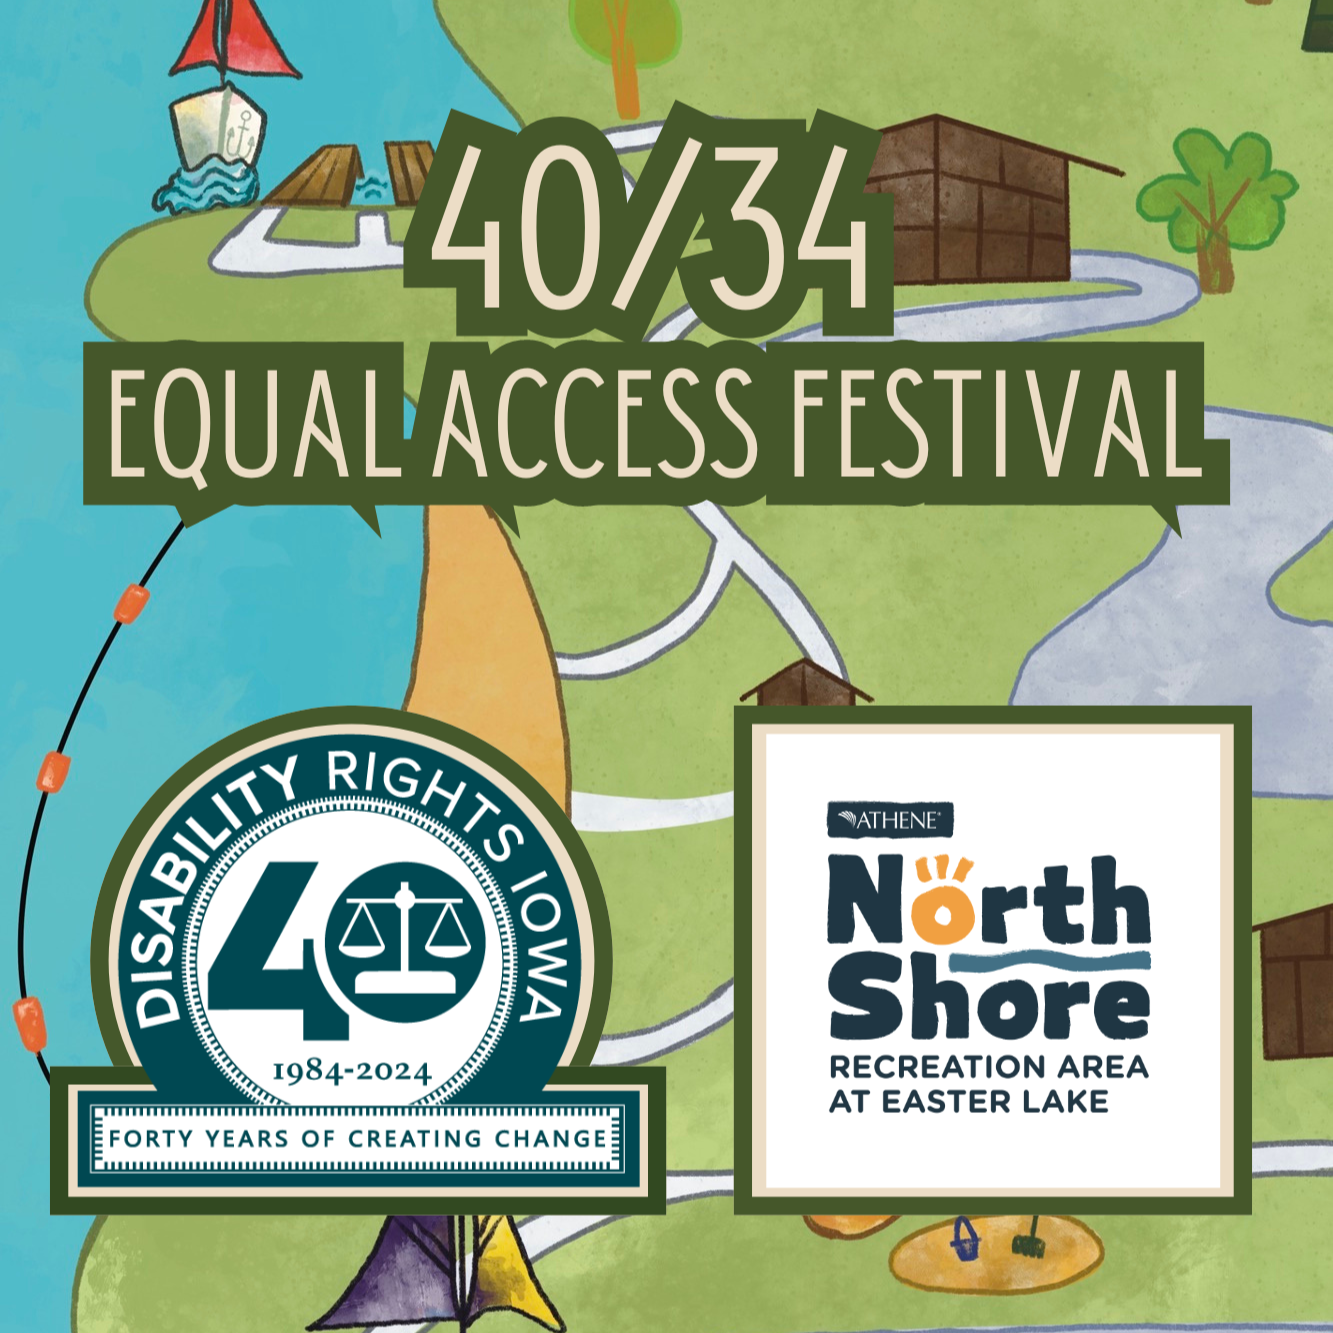 cartoon map of North Shore park viewed from the top. Boats, docks, playsets, buildings, and trees are scattered throughout where necessary. Text on top of this image reads "40/34 Equal Access Festival" DRI and North Shore Recreation Area logos are at the bottom of the image.